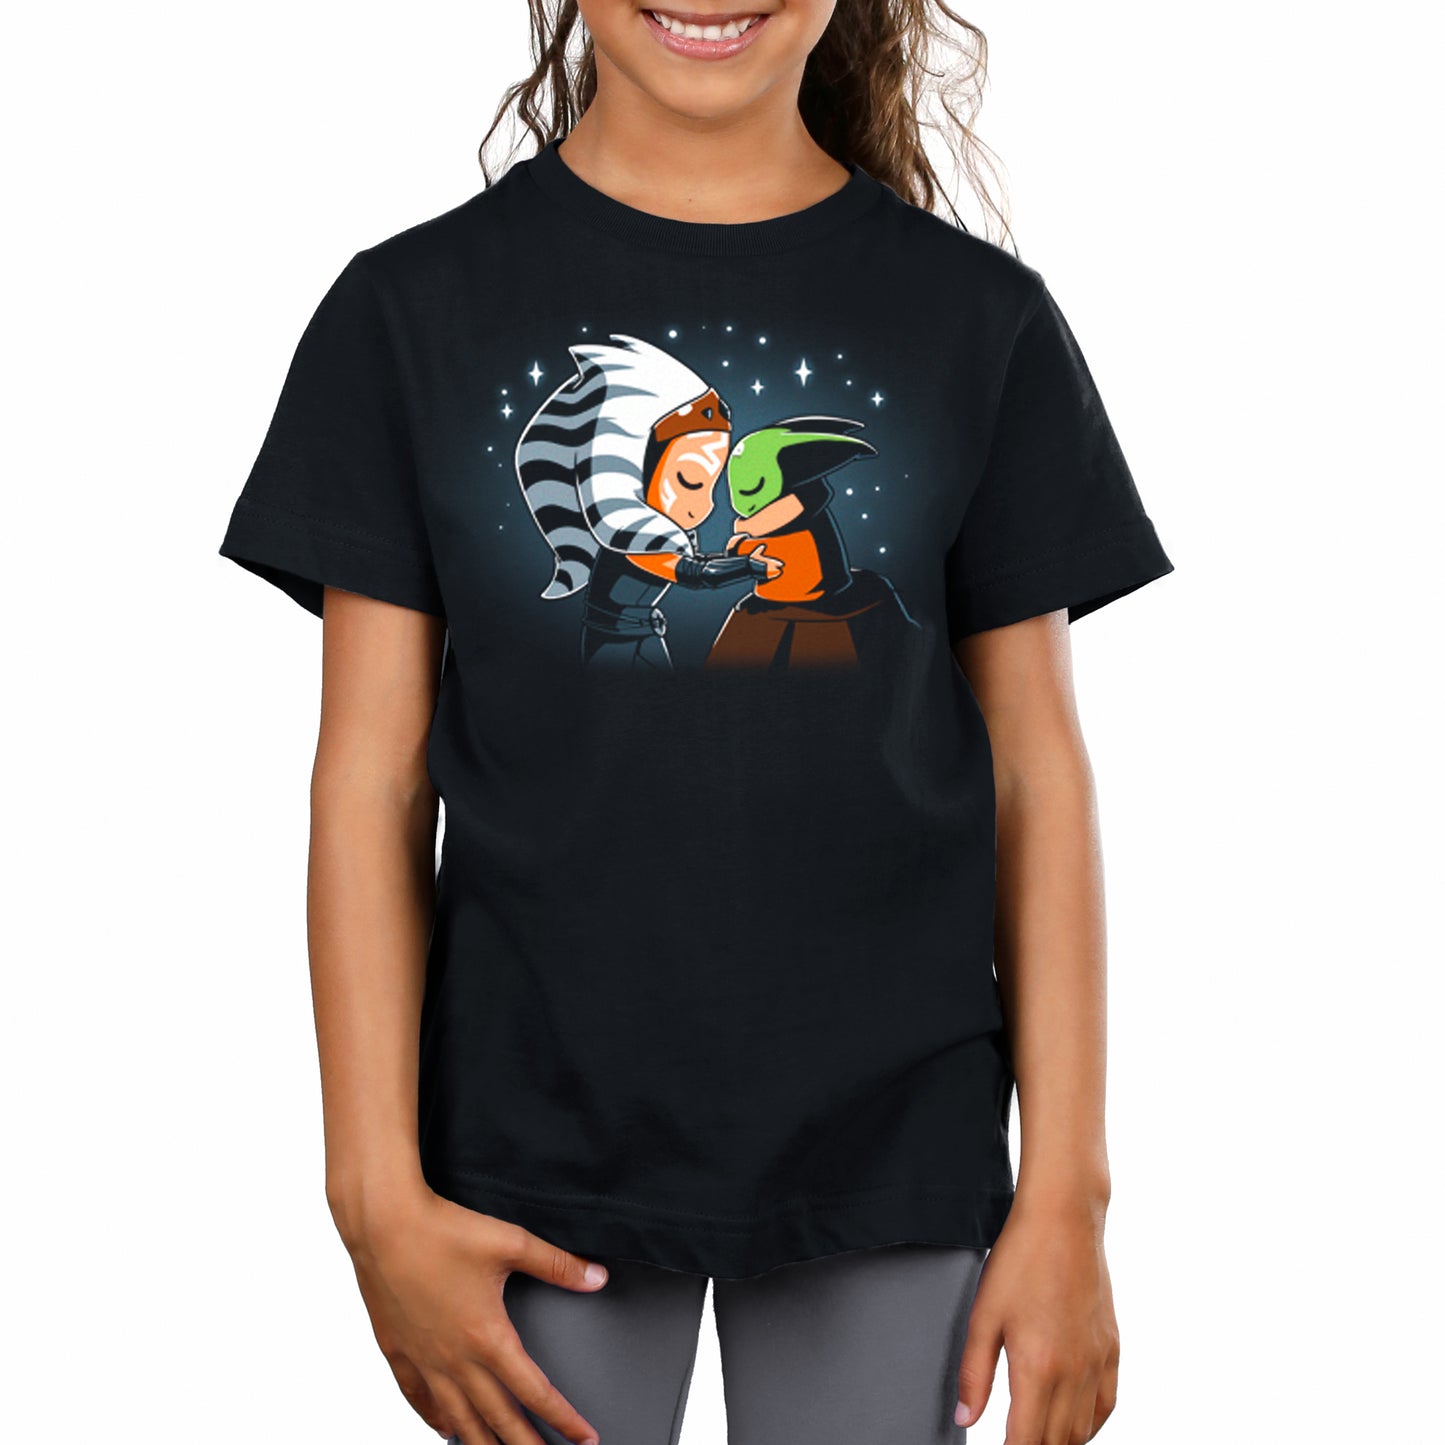 A girl wearing an officially licensed black T-shirt with a Star Wars Force Telepathy image.